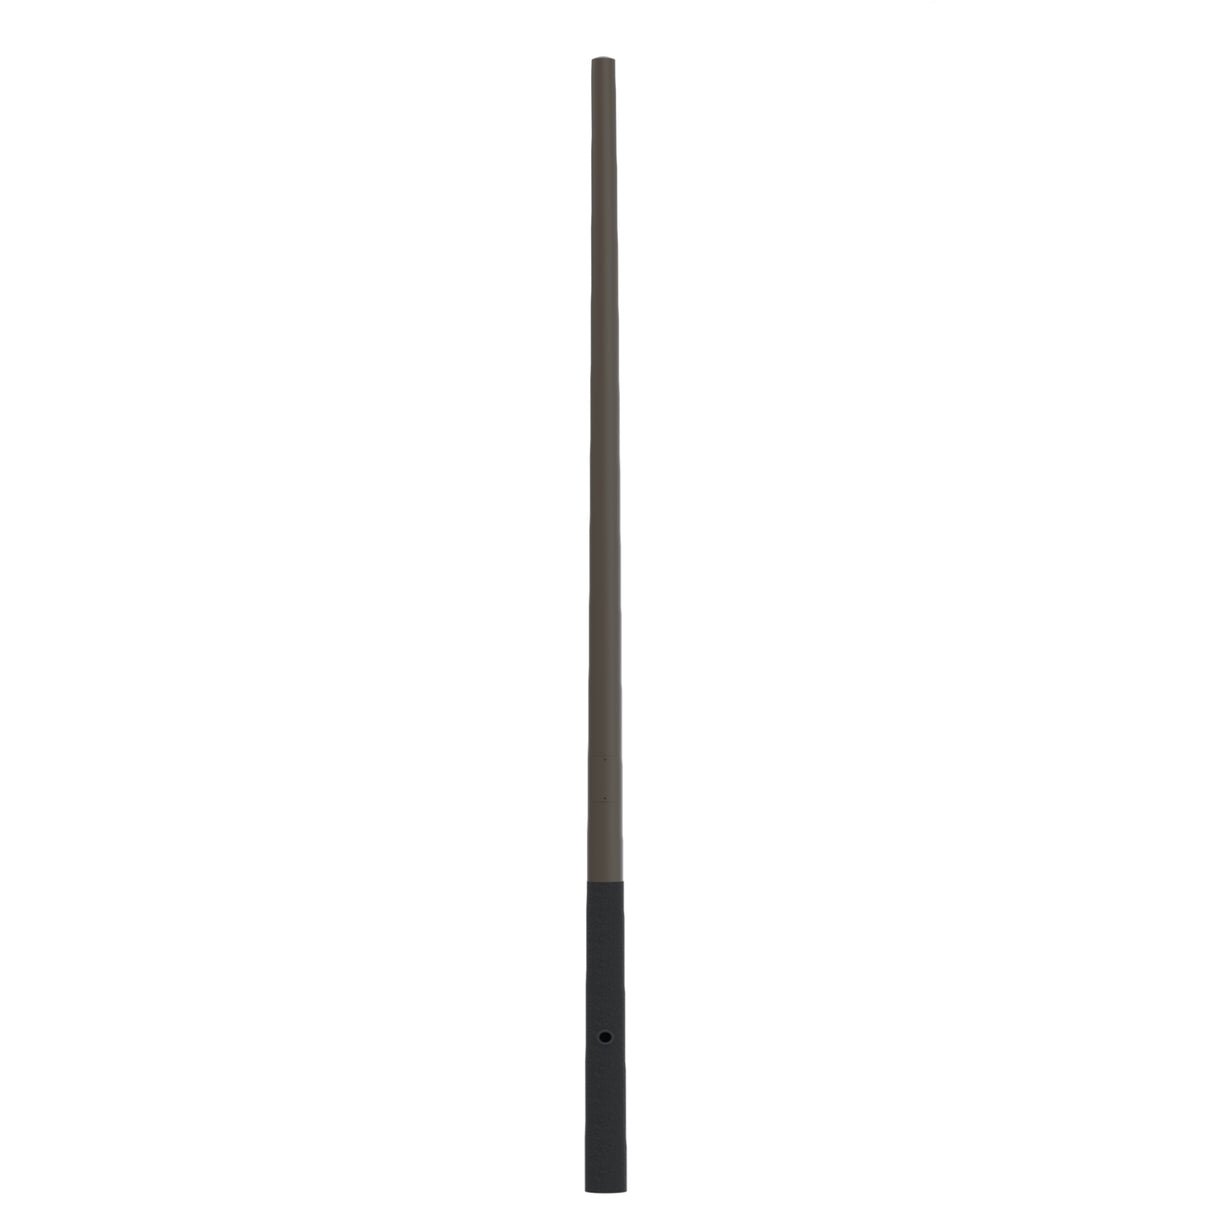 18' Above Grade x 5.0" Base OD x 3.0" Top OD x 0.156" Thick, Round Tapered Aluminum, Direct Burial Light Pole